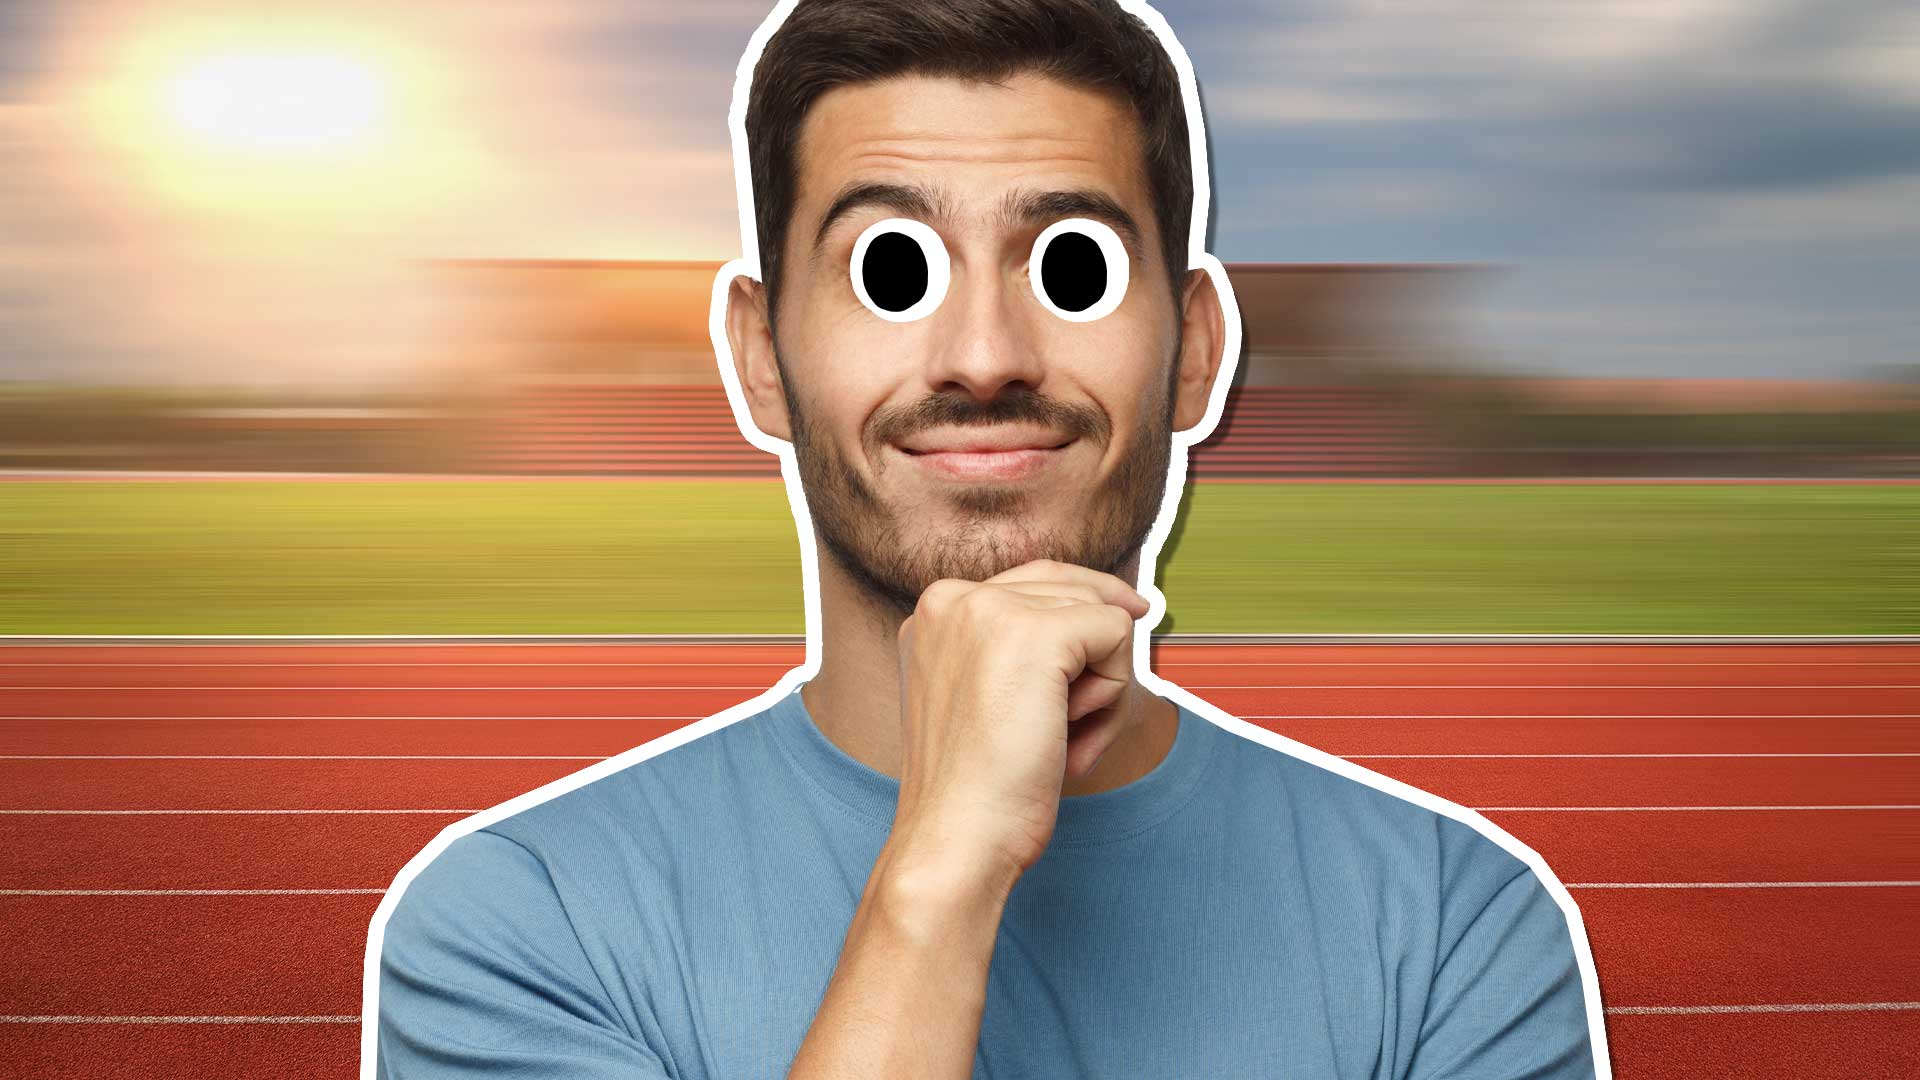 A man thinking about sport next to a running track